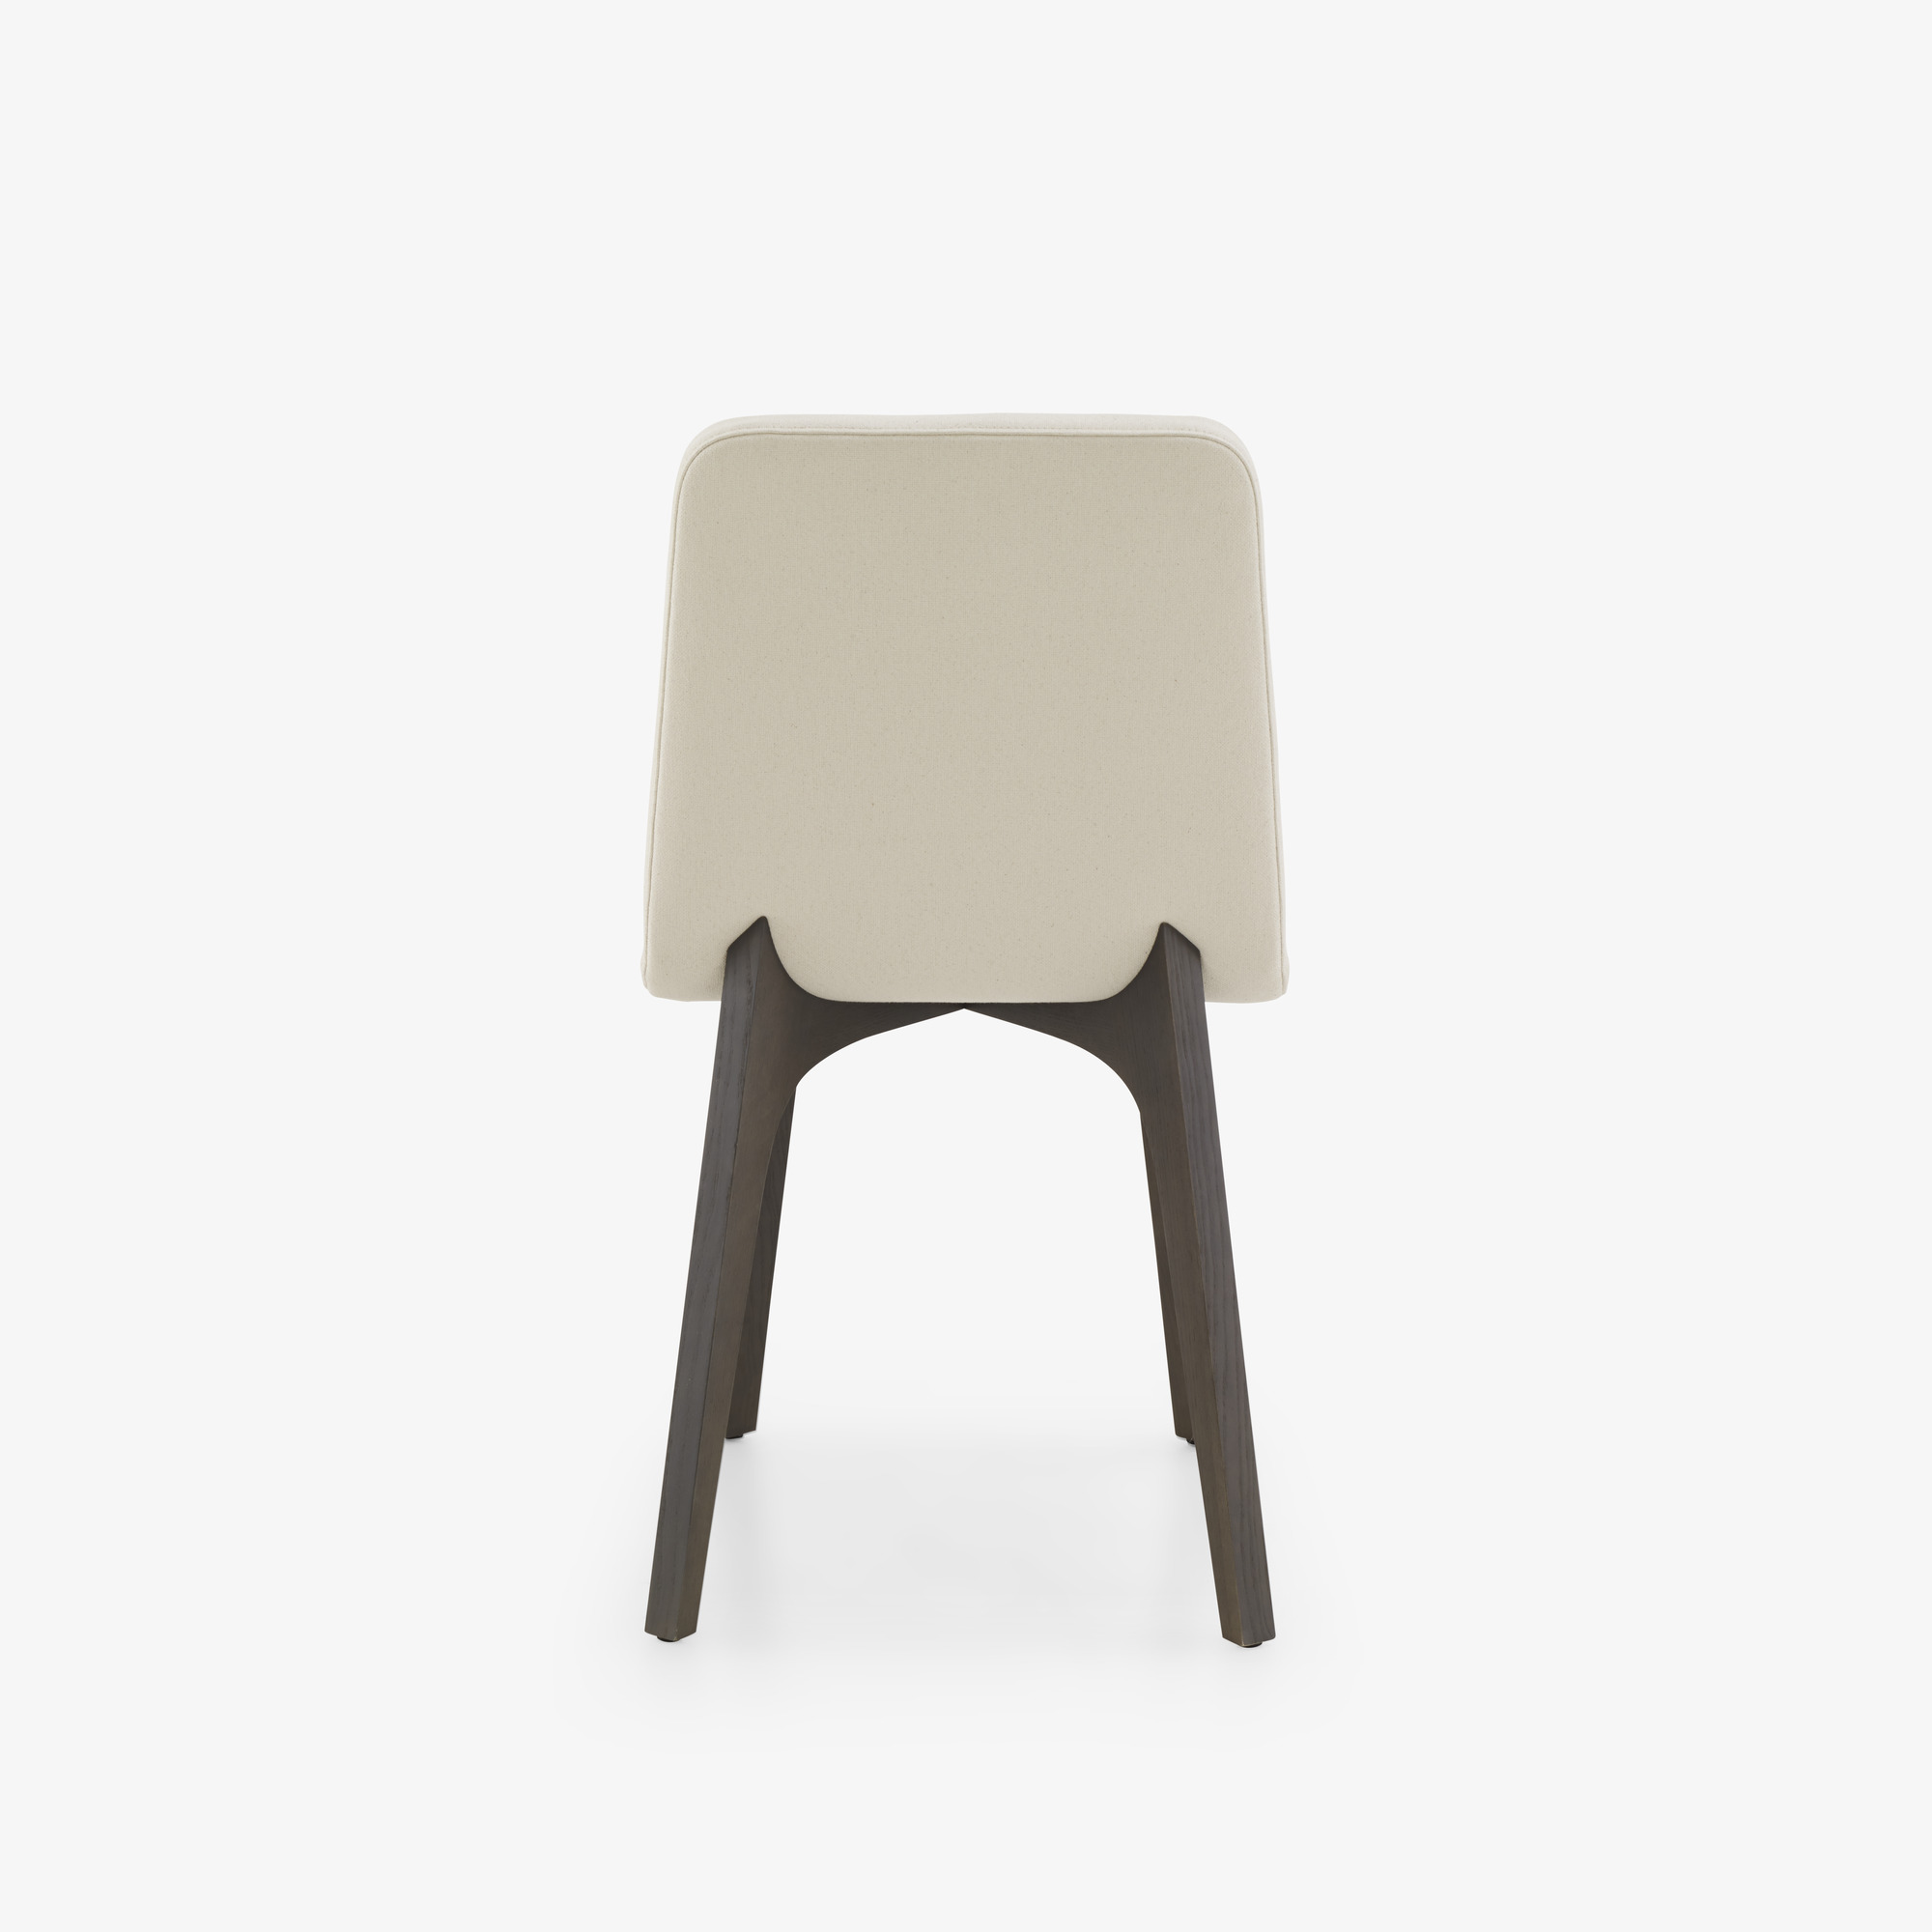 Image Dining chair wooden base 10